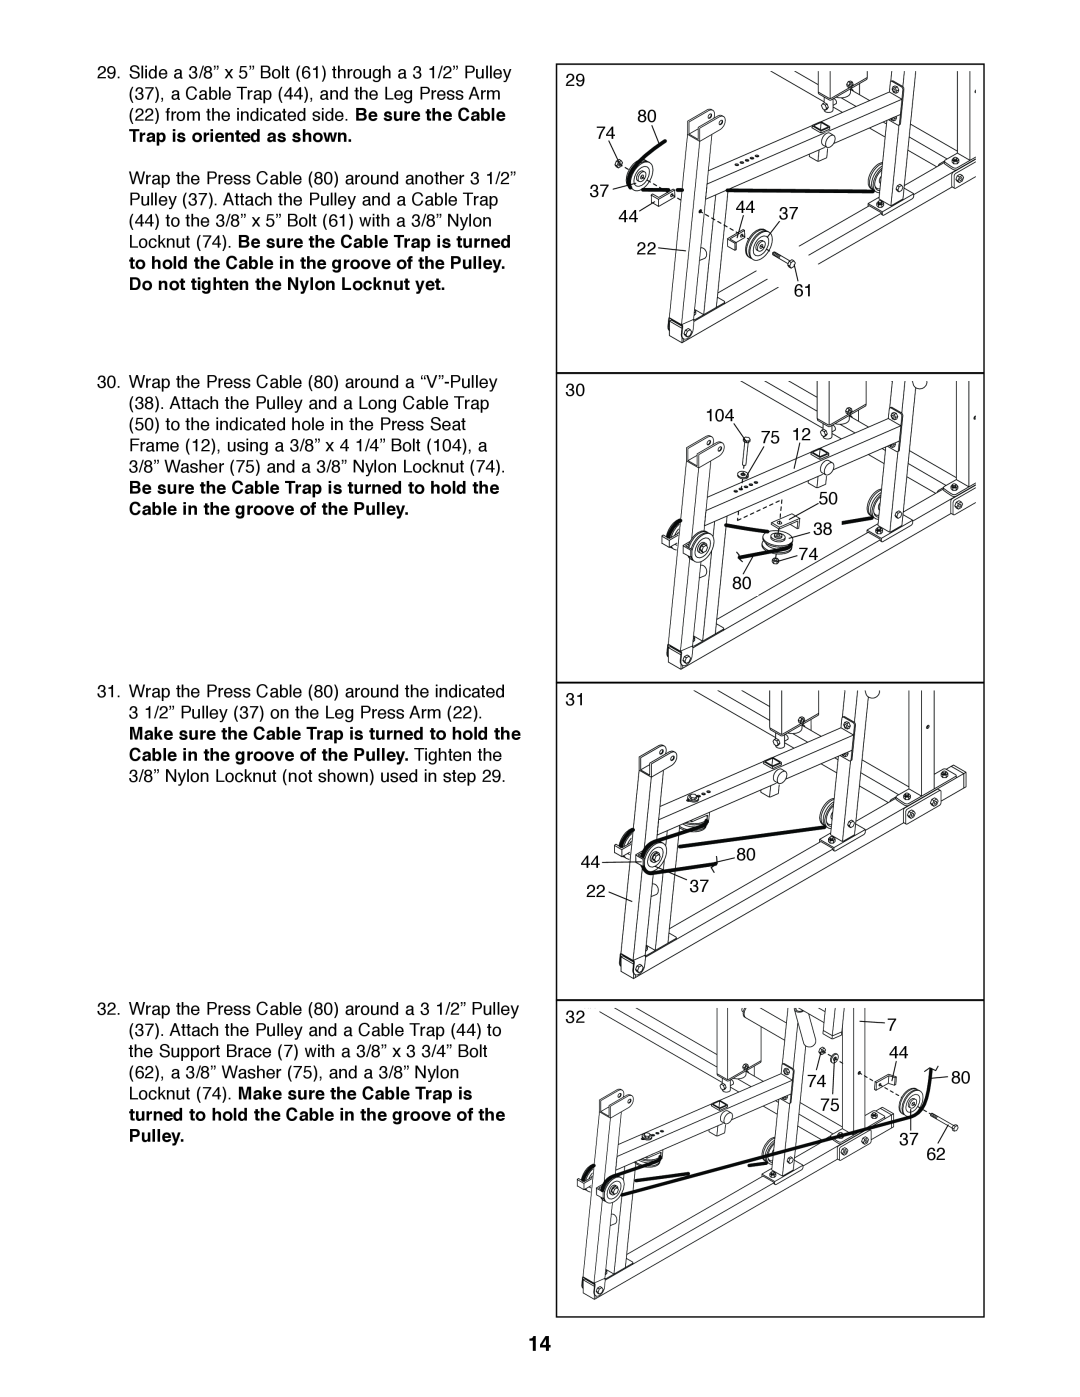 Weider 831.159530 user manual Trap is oriented as shown 